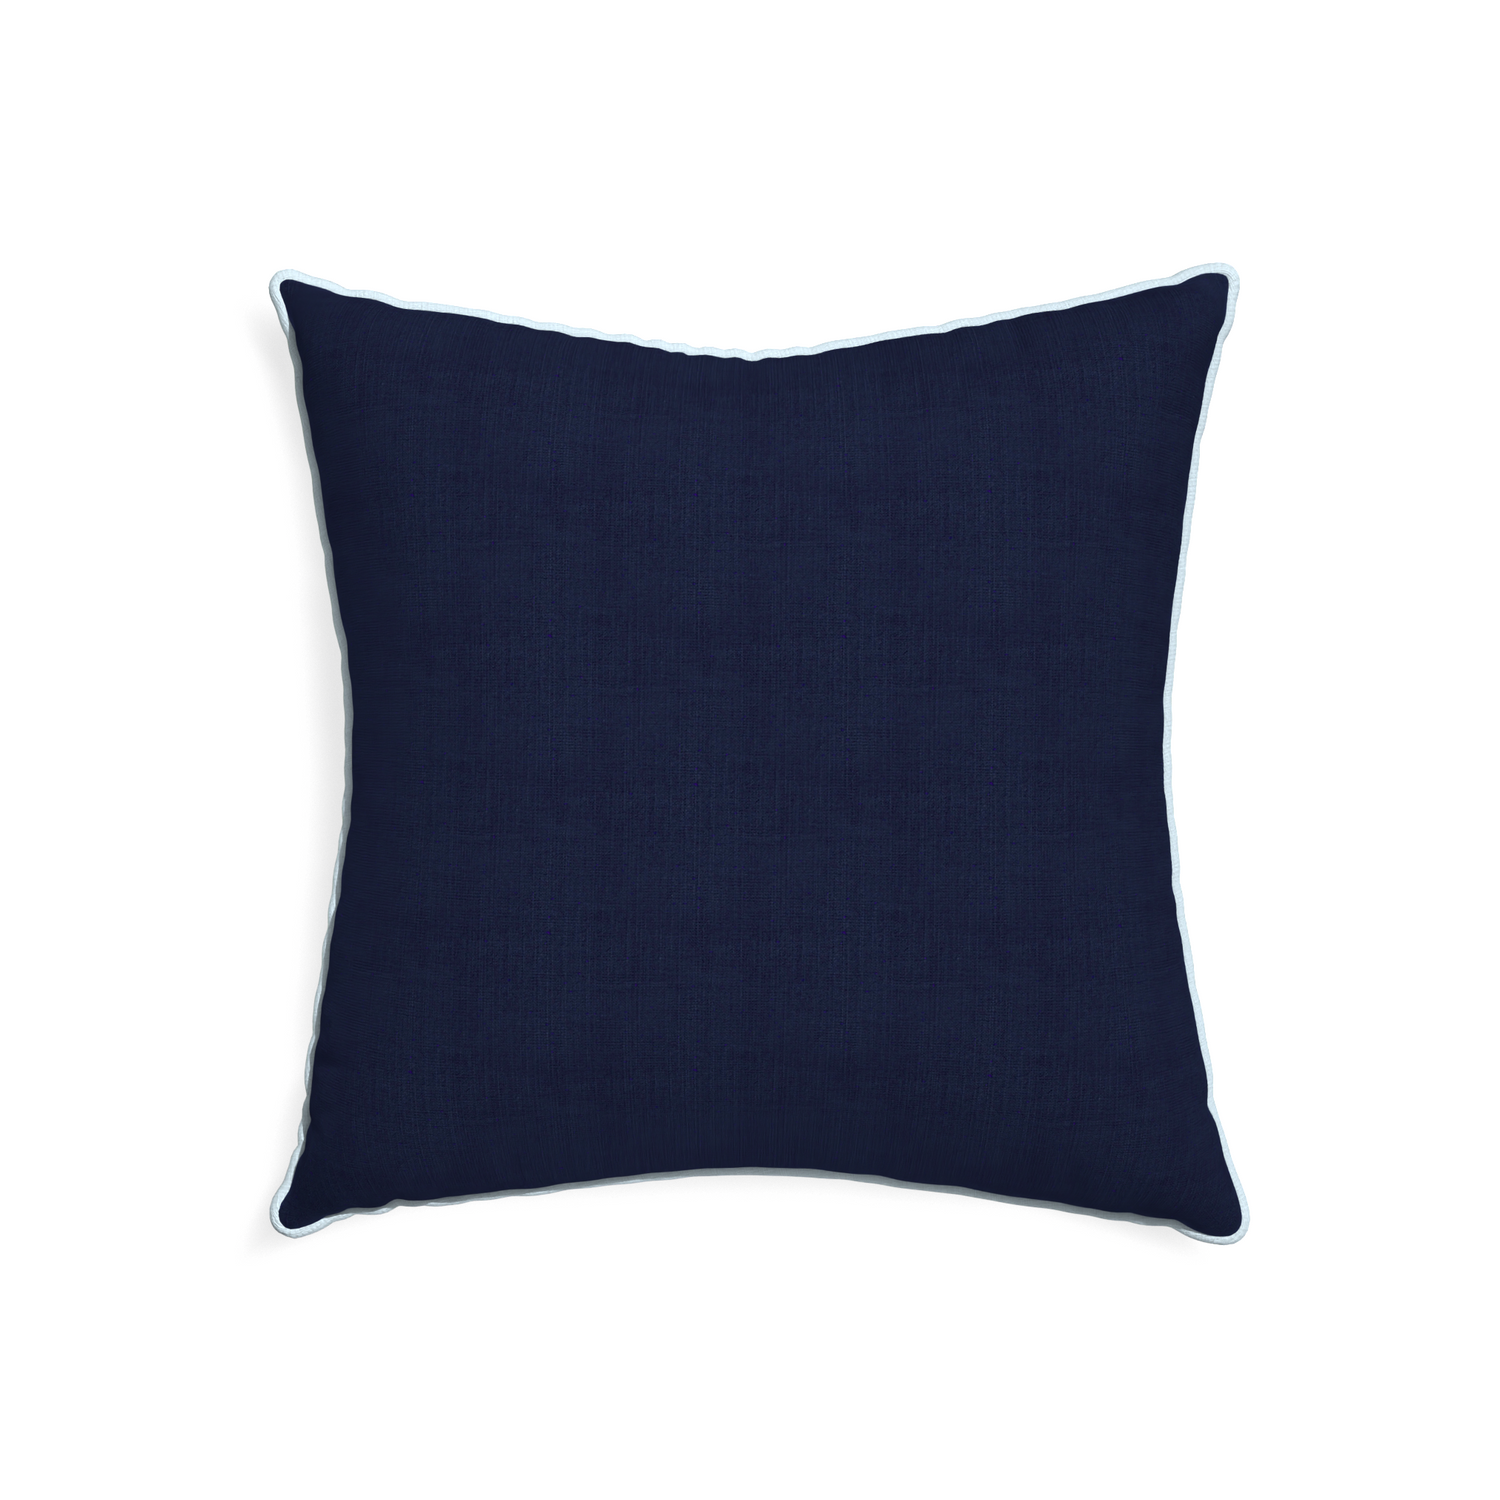 22-square midnight custom navy bluepillow with powder piping on white background